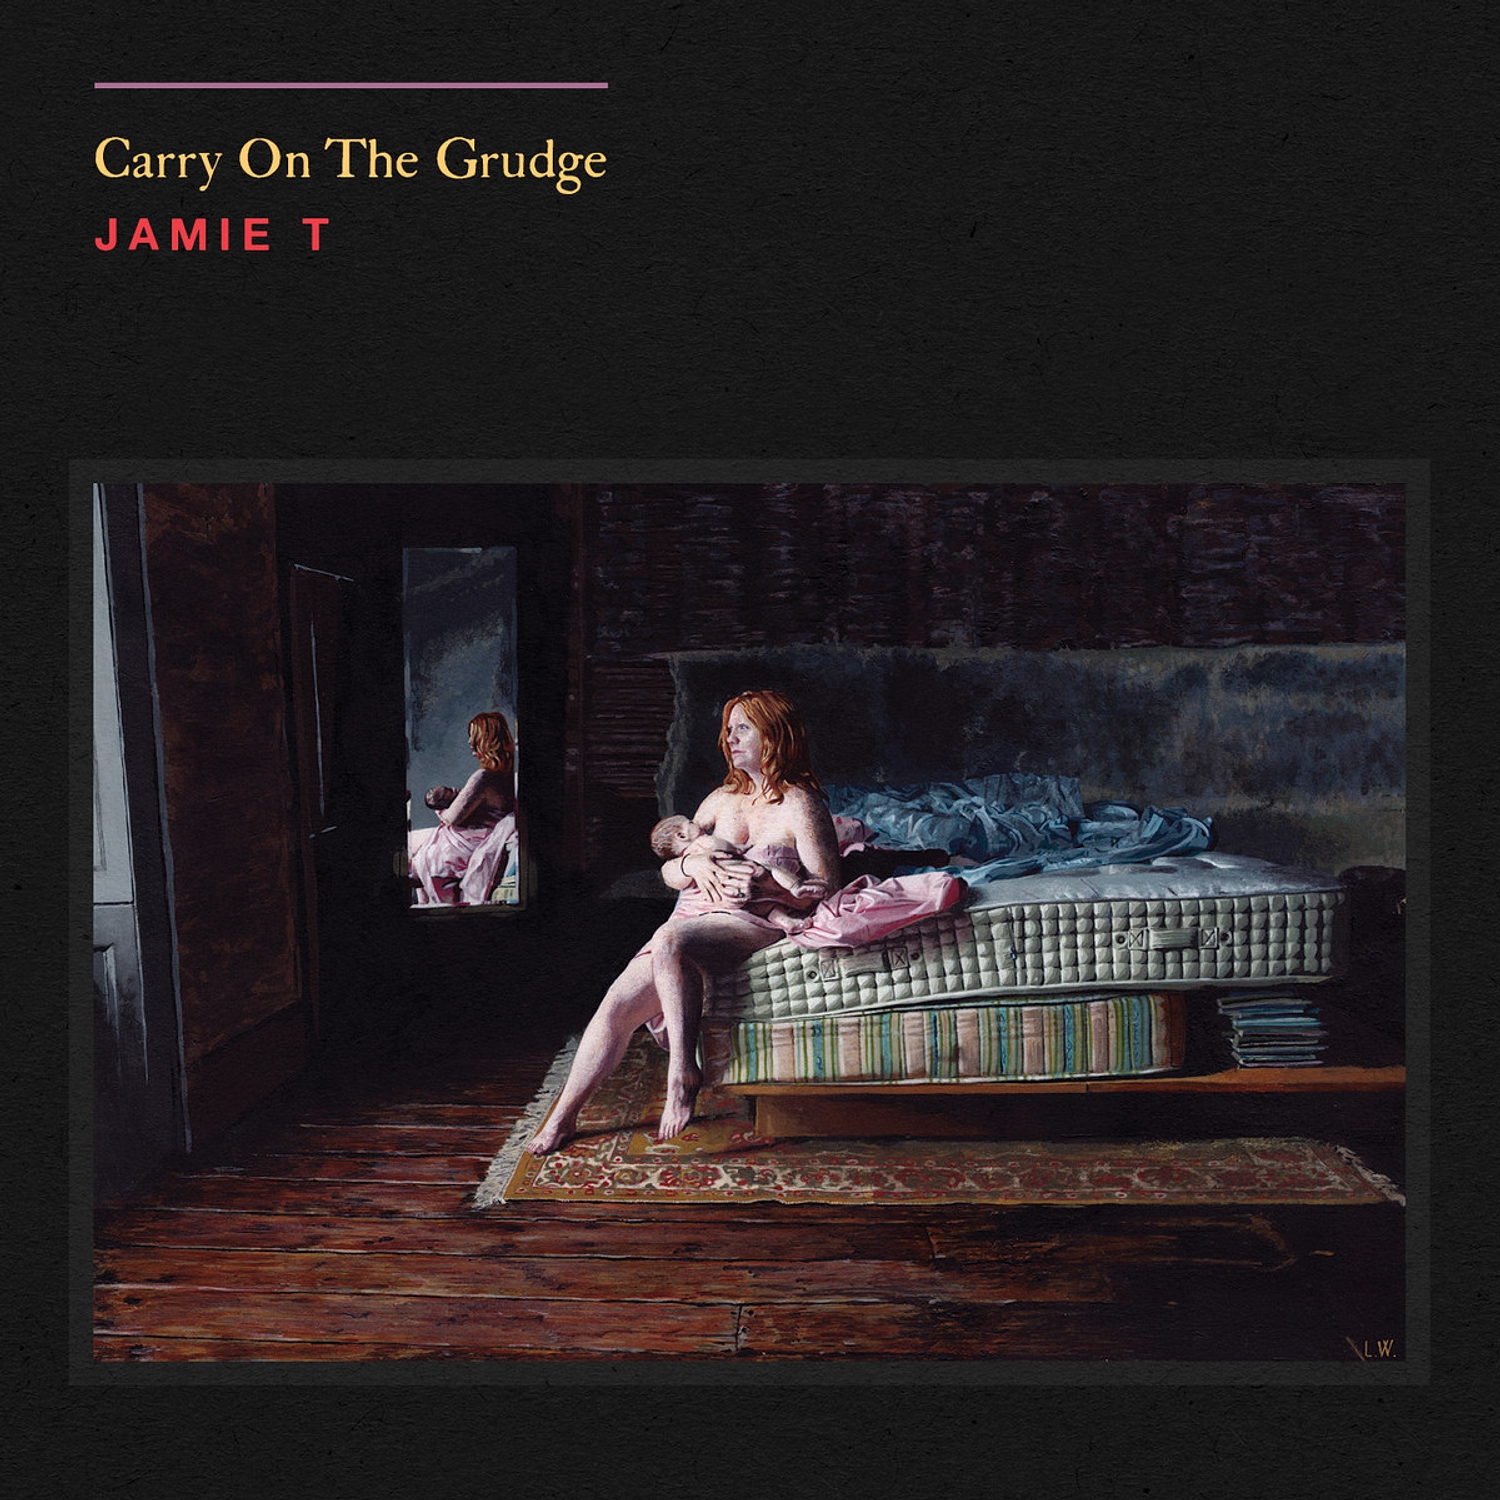 Jamie T new album 'Carry On The Grudge' gets pre-order, tracklist and artwork